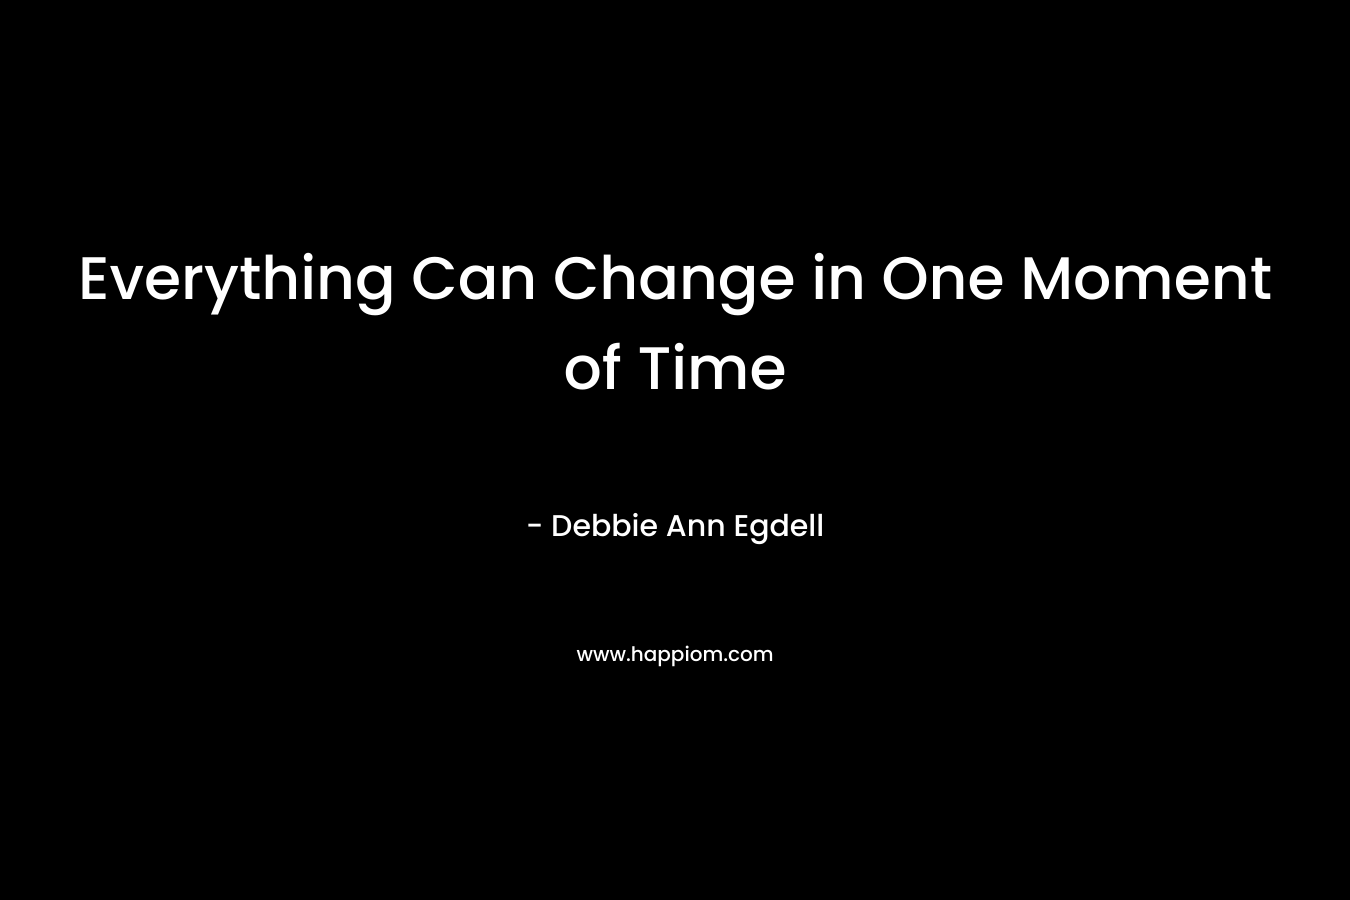 Everything Can Change in One Moment of Time